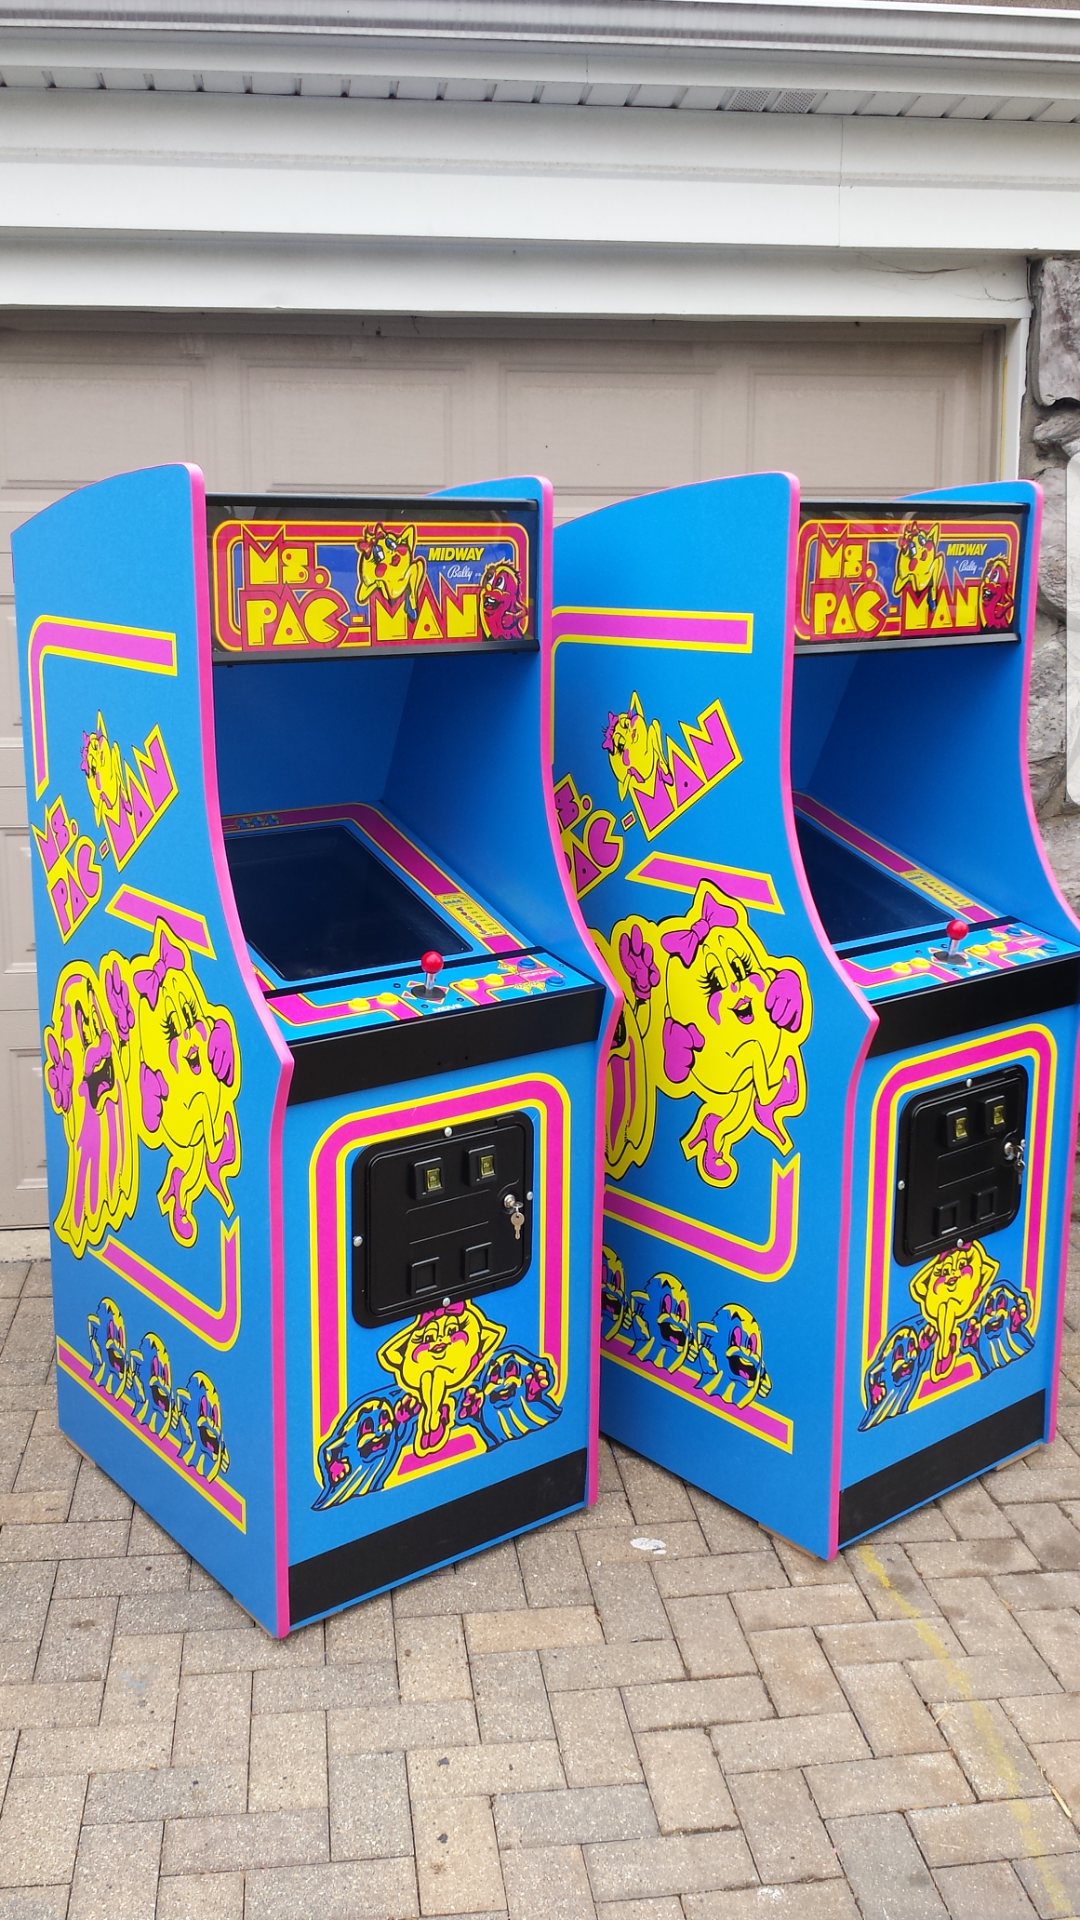 Brand new Ms Pacman arcade game plays 60 games Prince Arcades